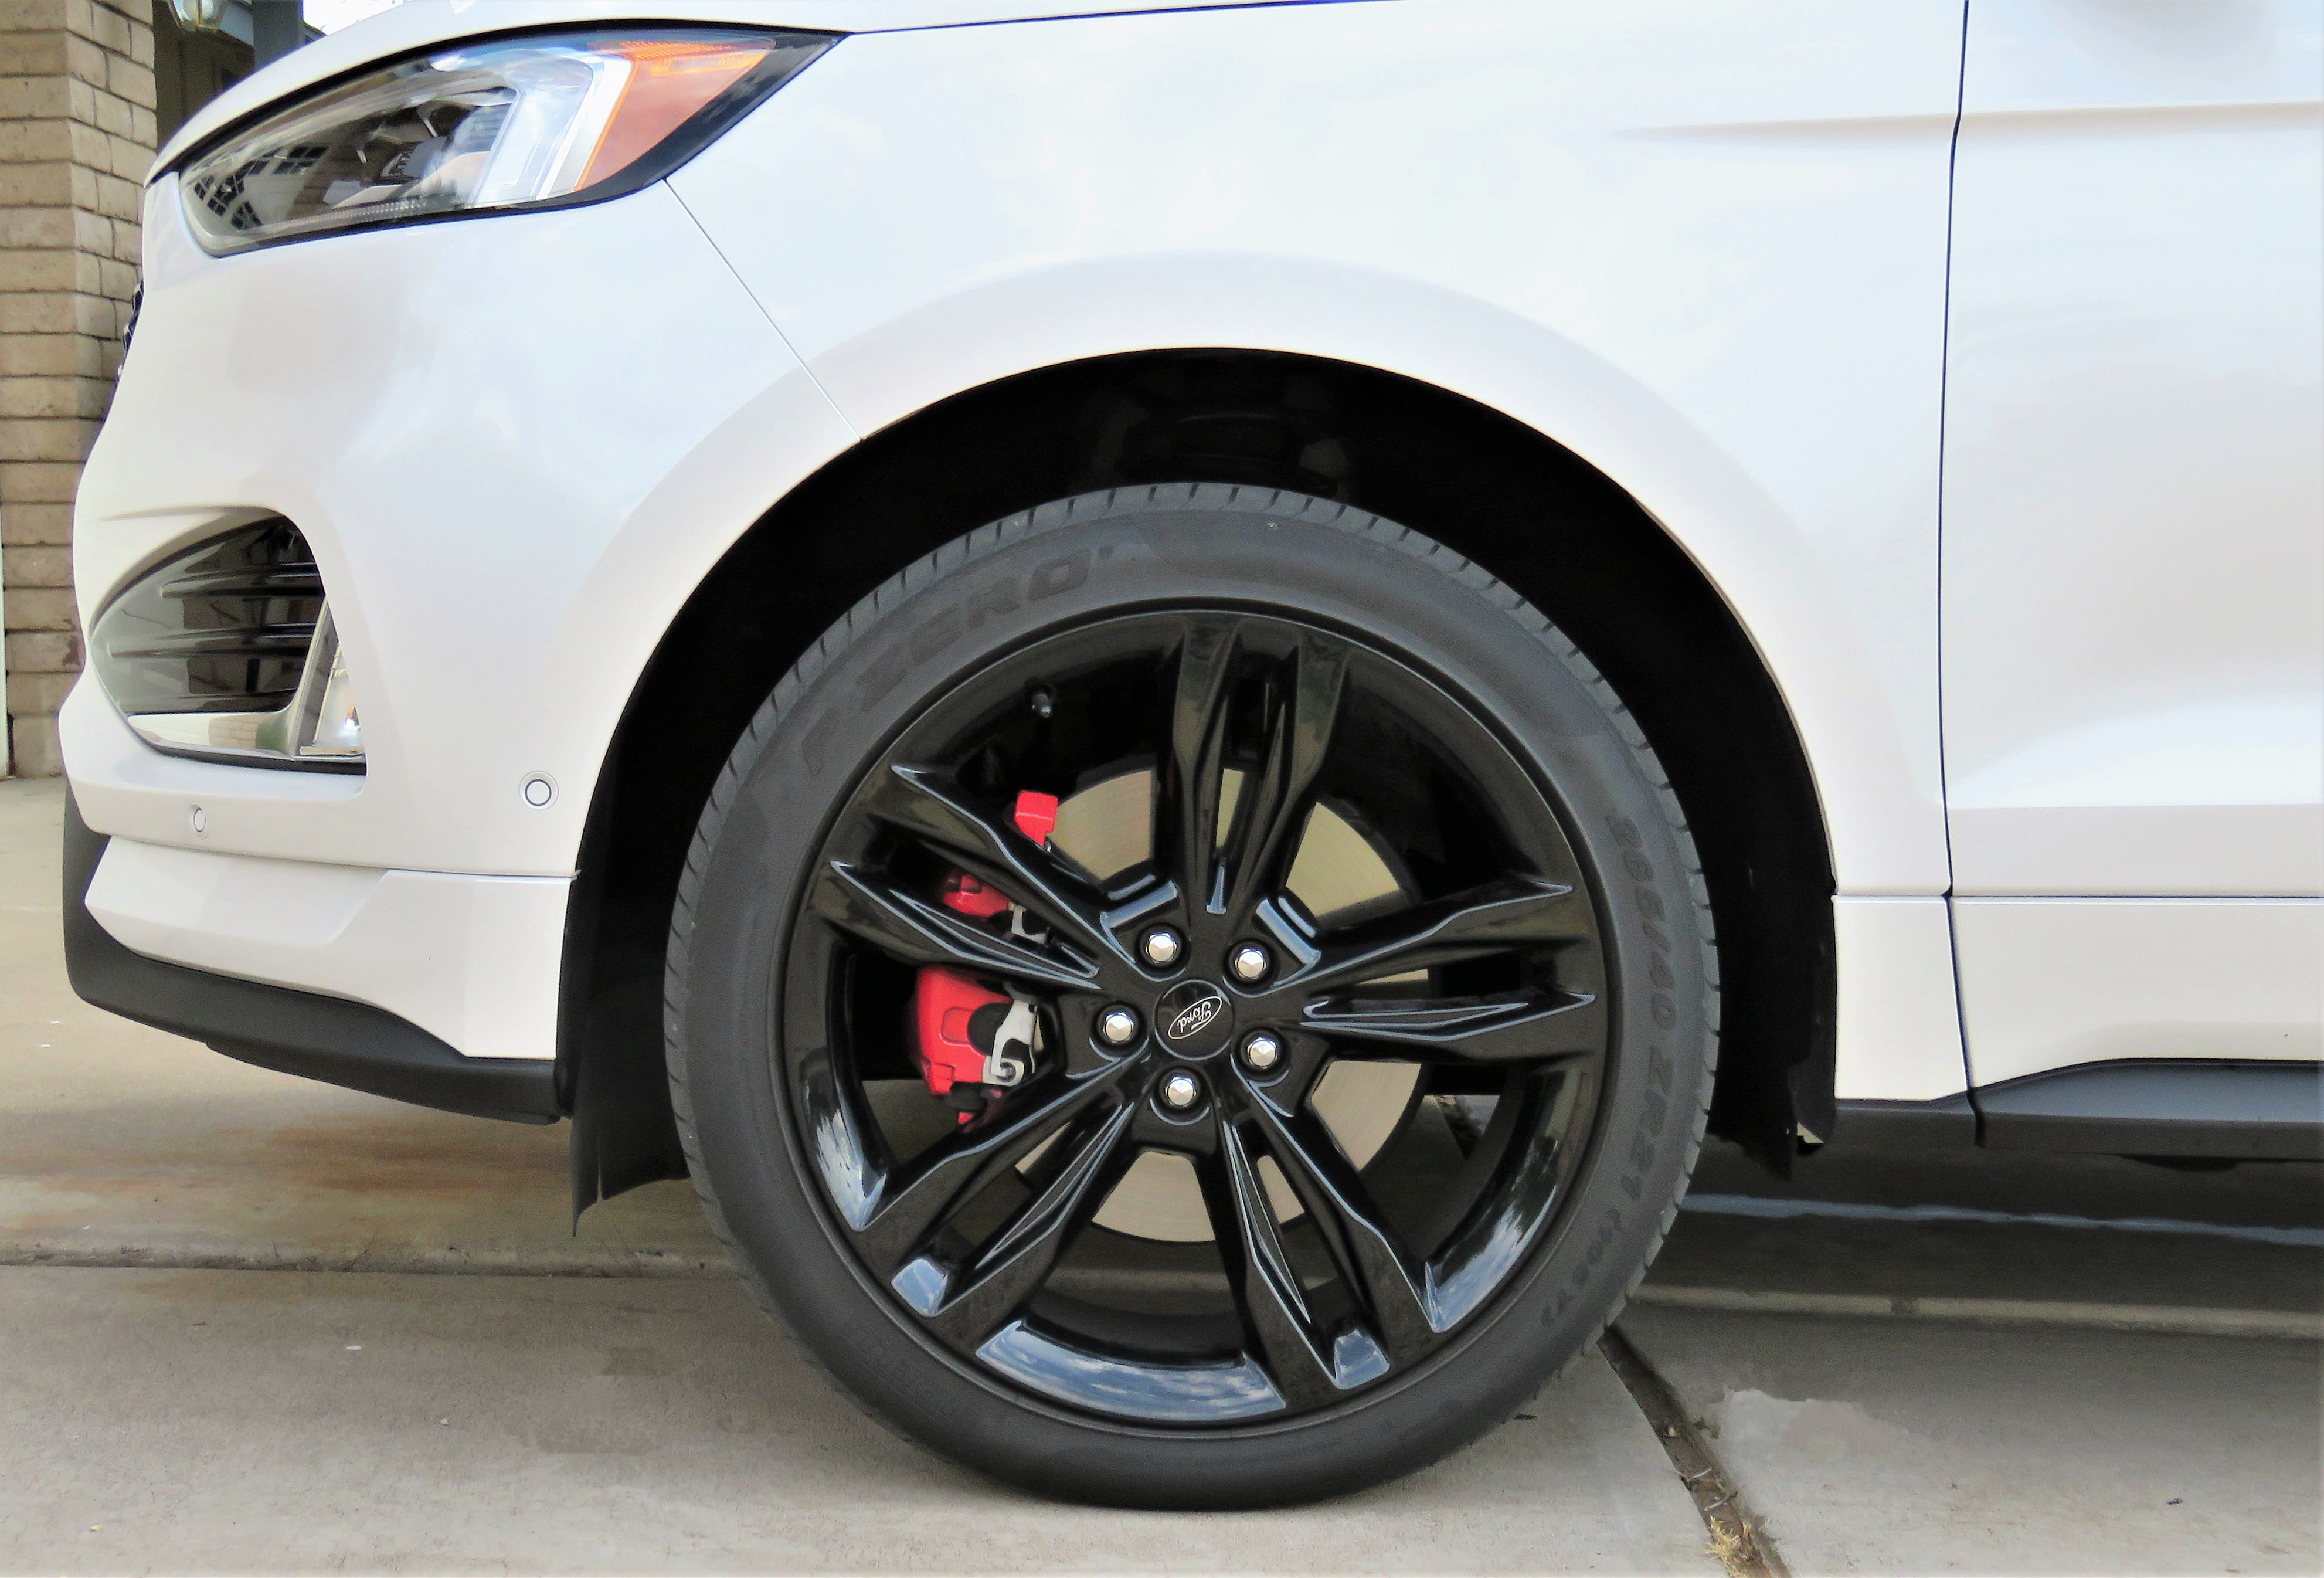 edge, Ford Edge goes from dull to dynamic with ST performance package, ClassicCars.com Journal